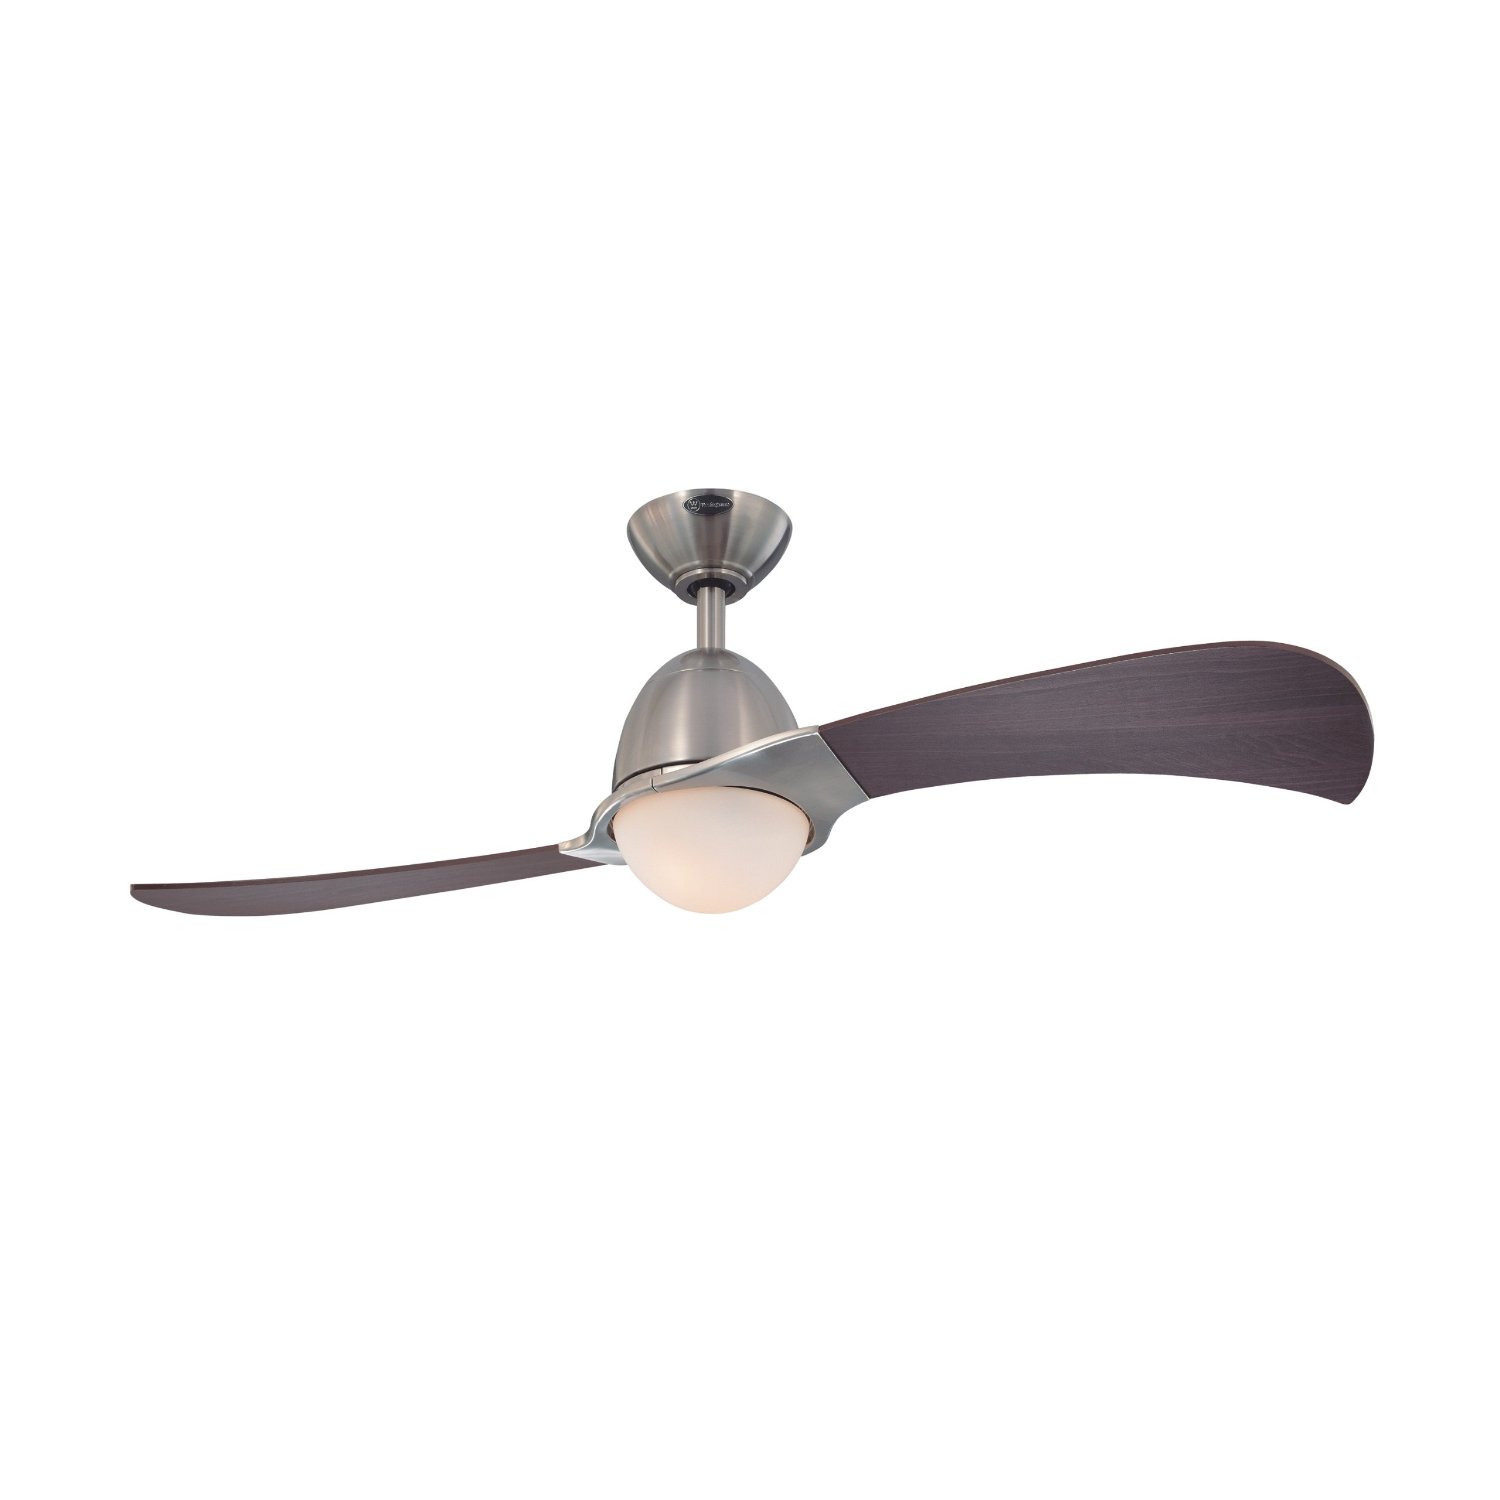 Westinghouse 7216100 Solana Two-Light 48-Inch Two-Blade Indoor Ceiling Fan, Brushed Nickel with Opal Frosted Glass